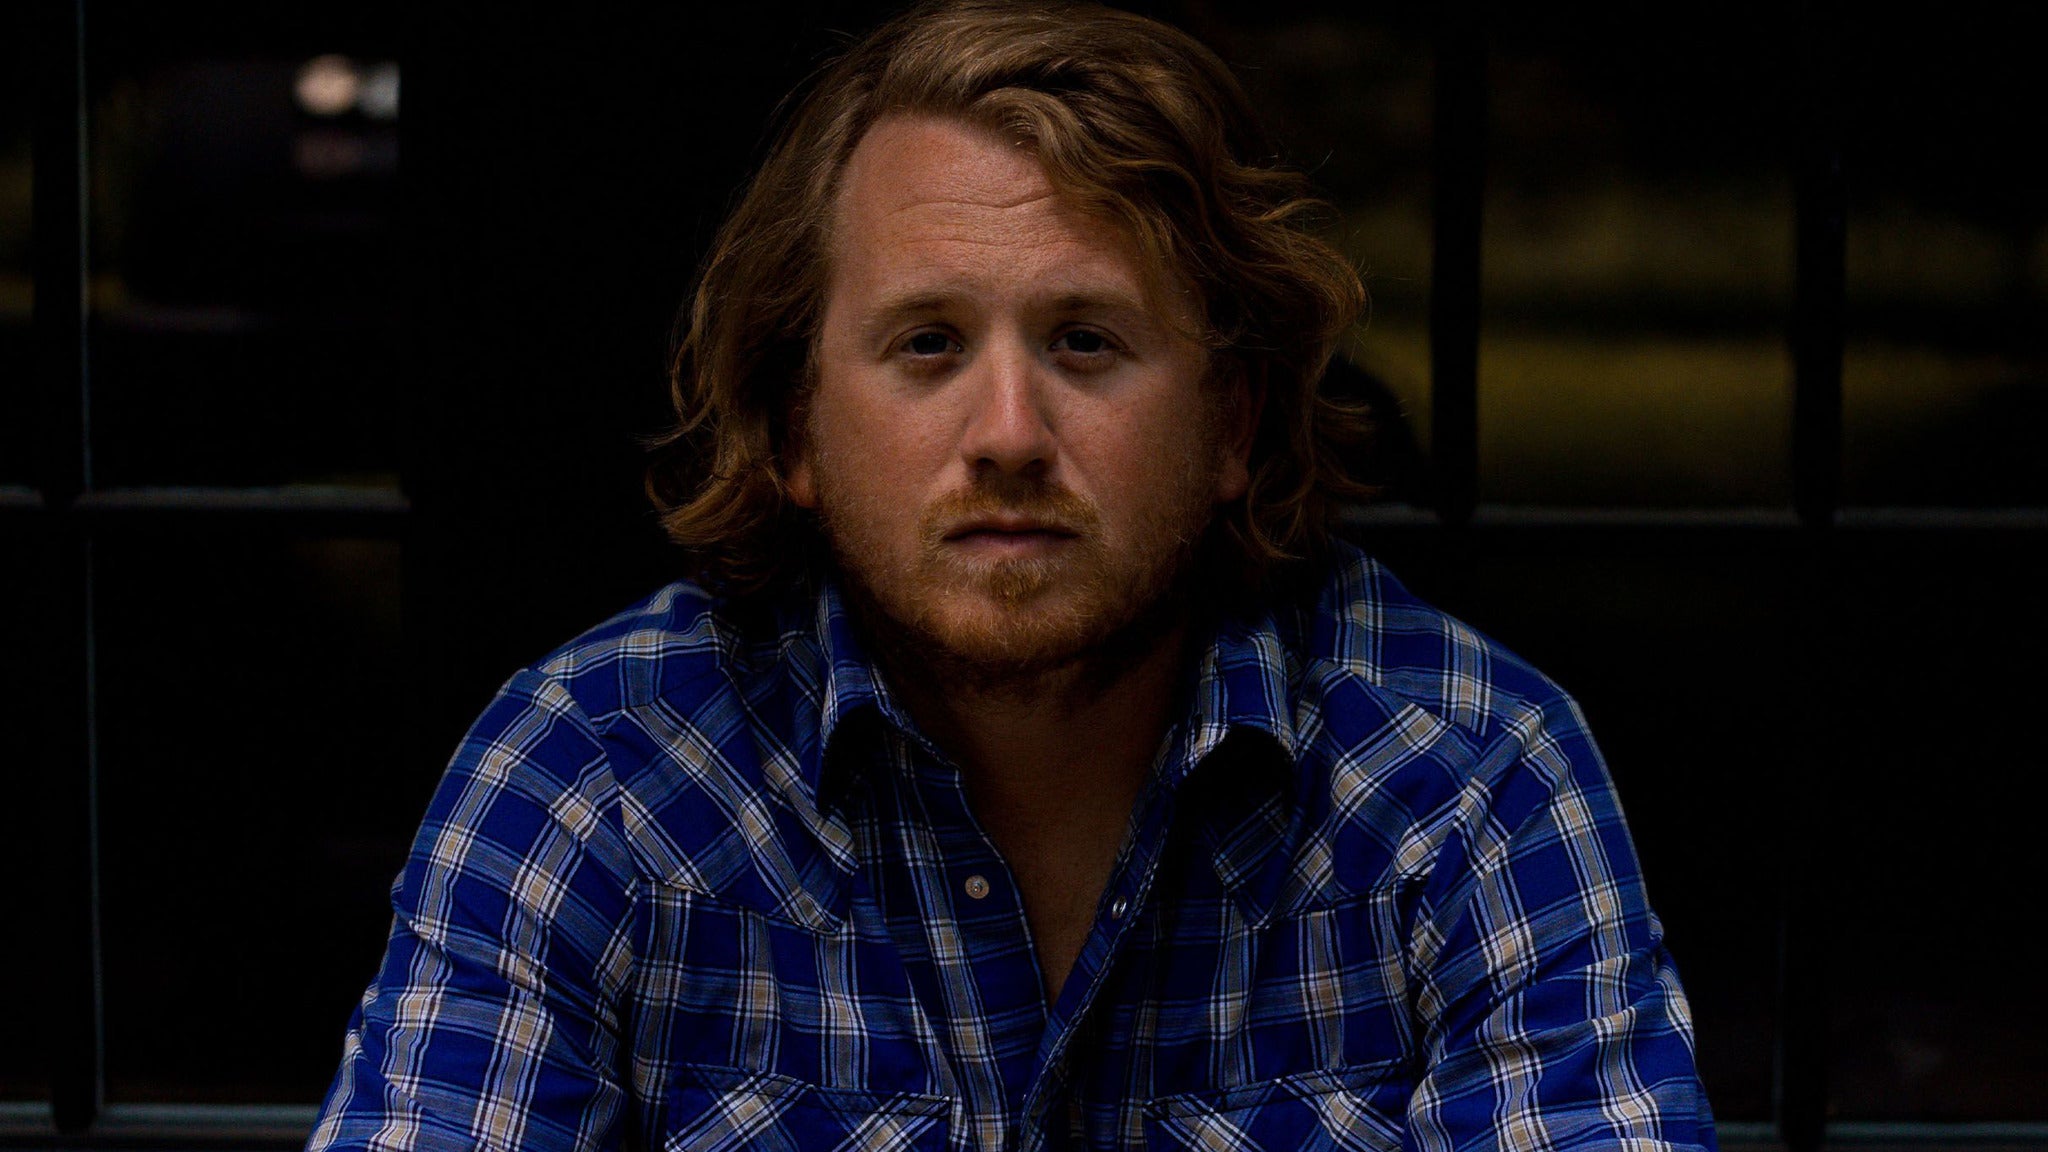 William Clark Green presale password for event tickets in Fort Smith, AR (Templelive Fort Smith)